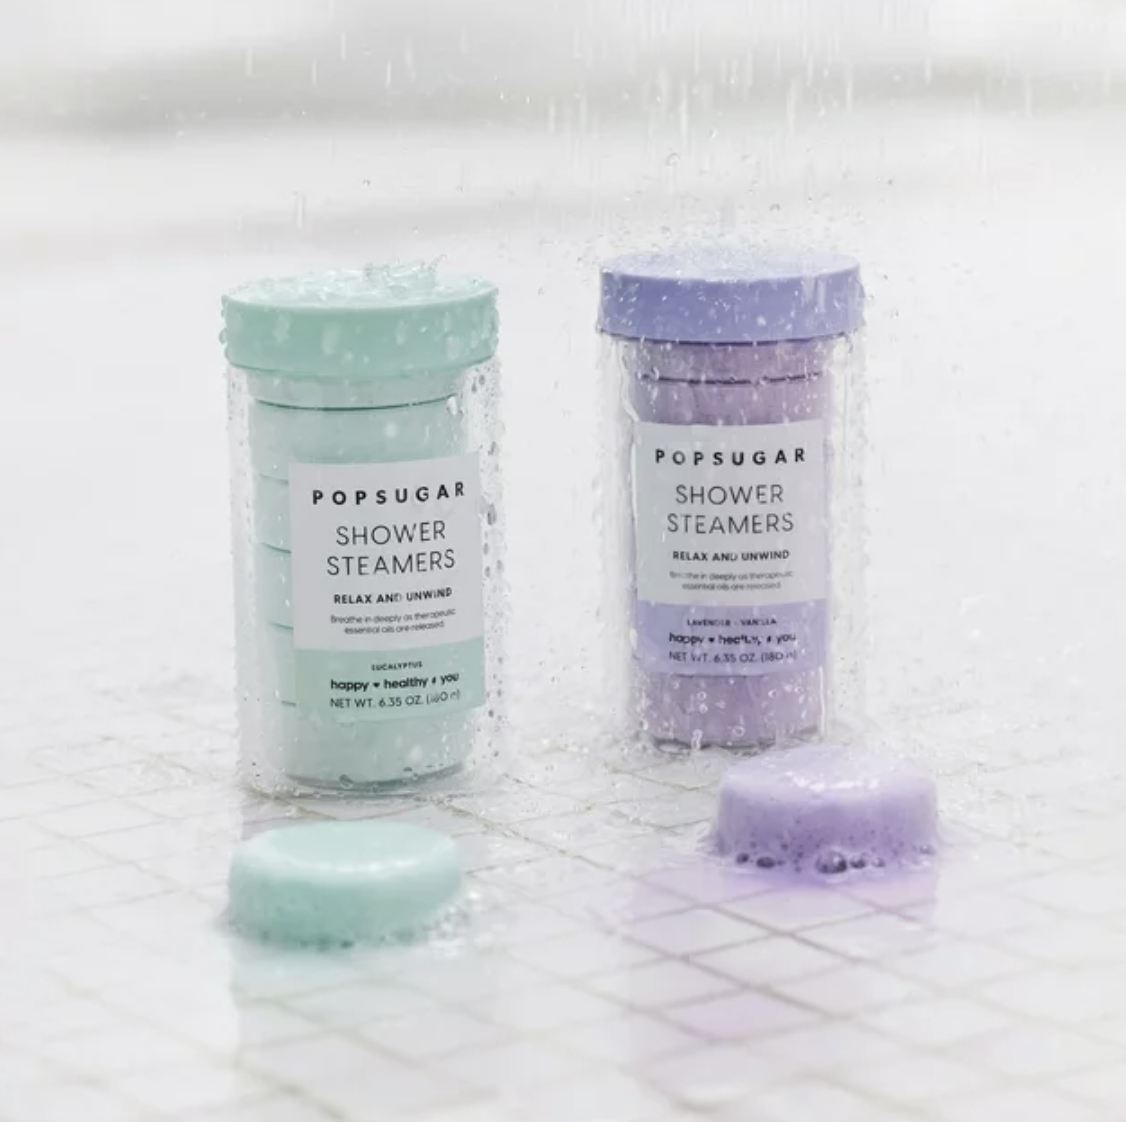 Two shower steamer bottles with tablets on a wet surface, labeled &quot;POPSUGAR&quot; for relaxation